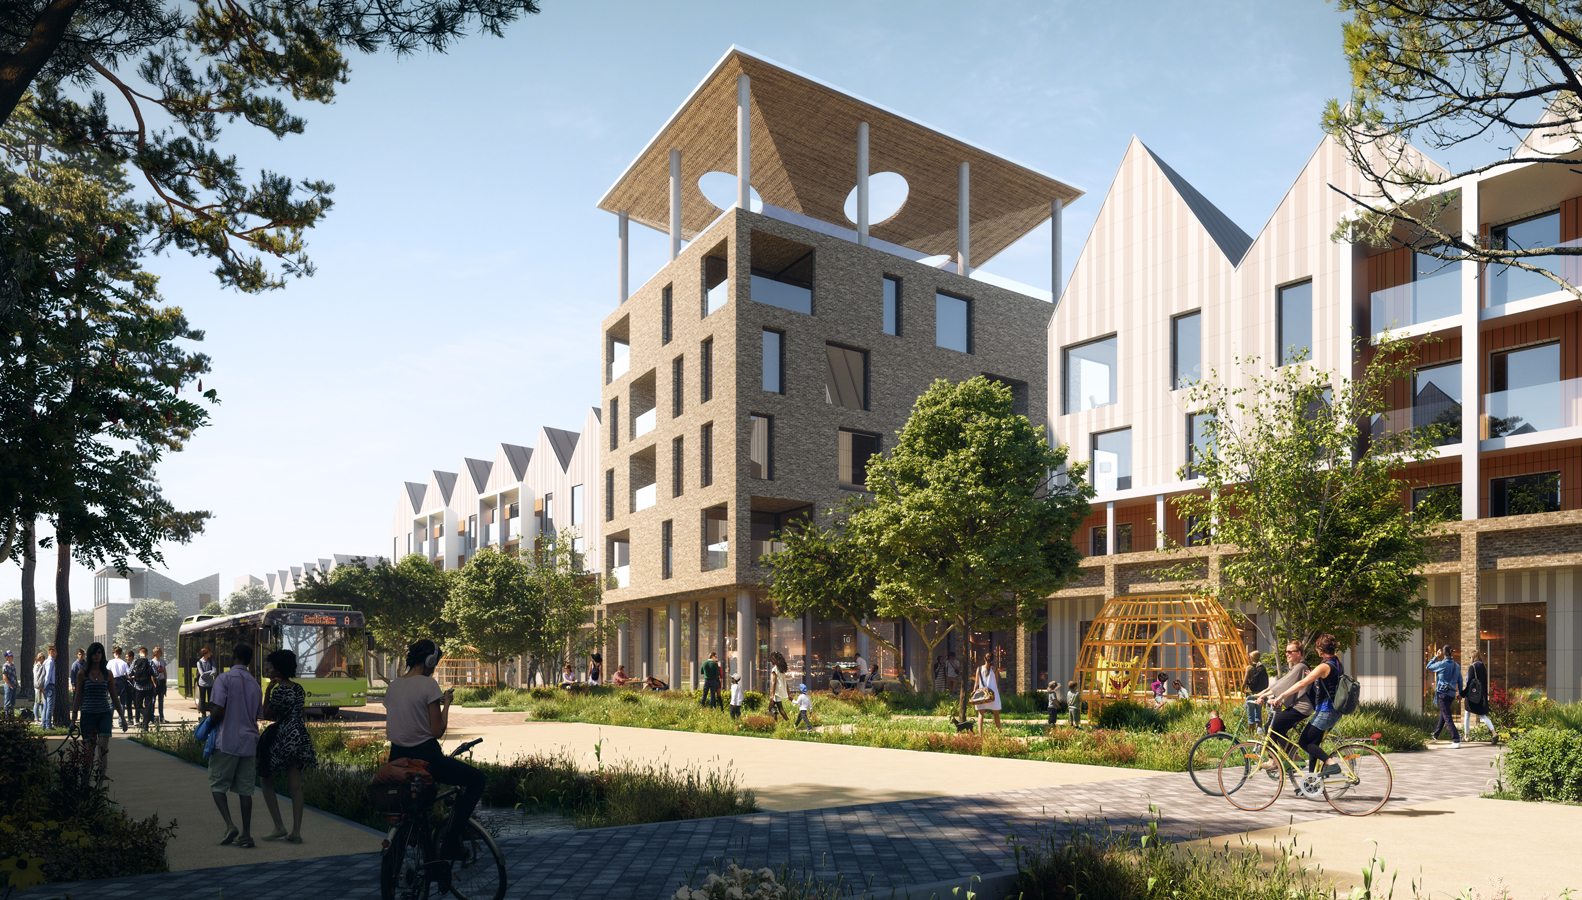 Proctor & Matthews partners with Urban Splash and Homes England to deliver new town quarter in Northstowe